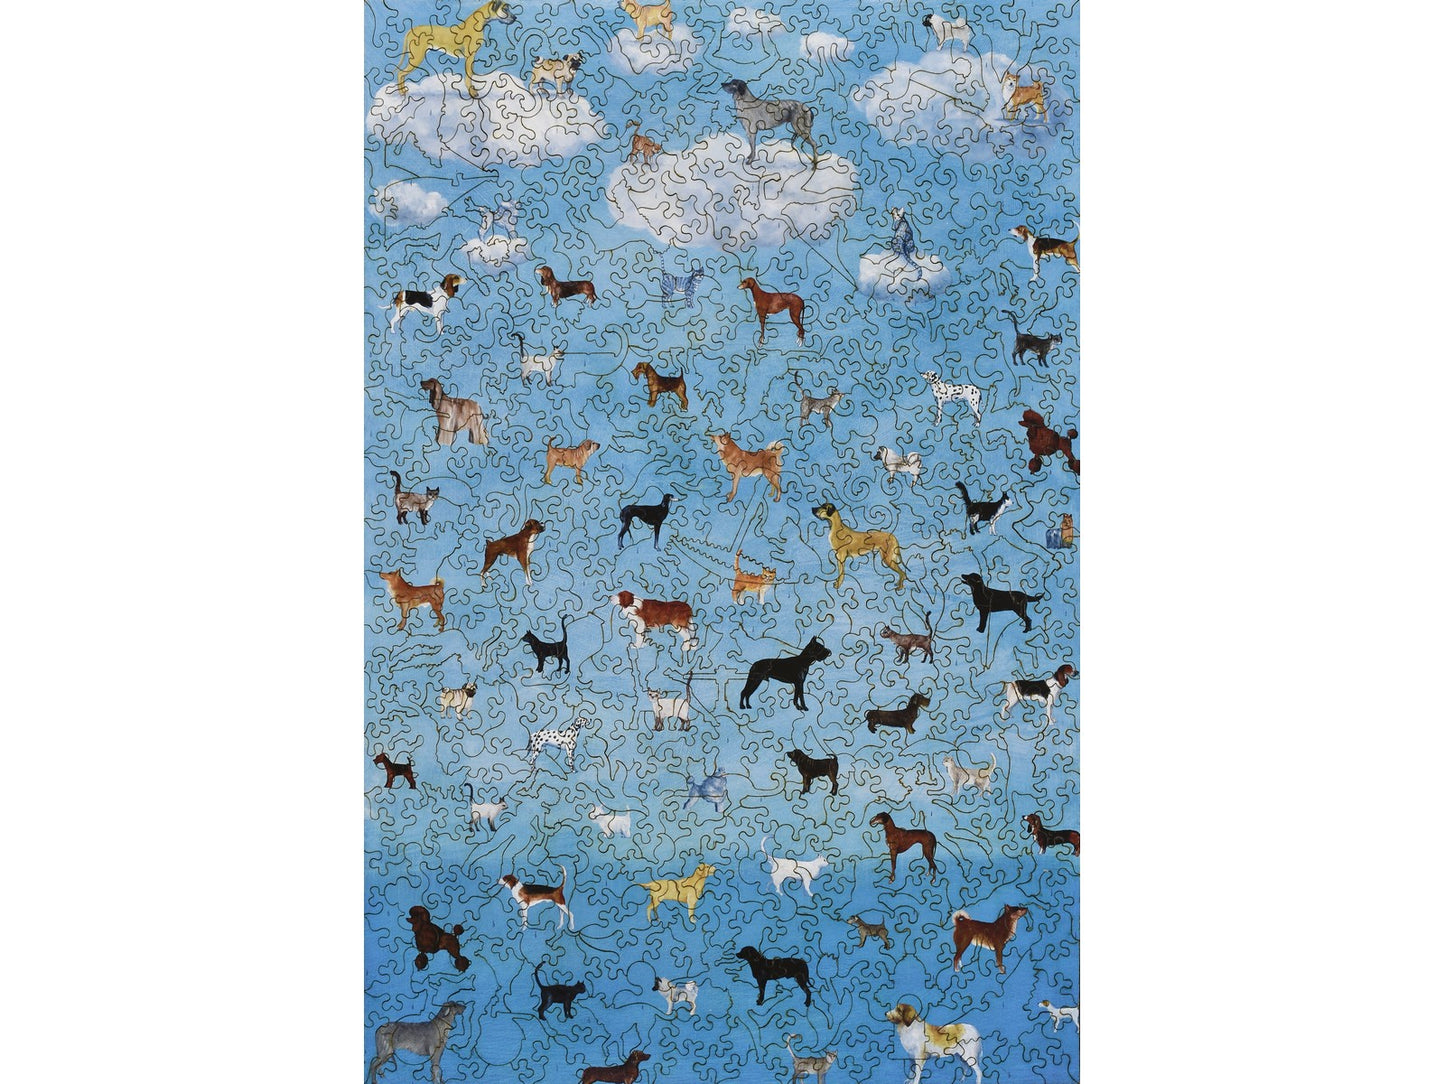 https://libertypuzzles.com/cdn/shop/files/Raining-Cats-and-Dogs-puzzle-xl-wooden-jigsaw-puzzle.jpg?v=1687892072&width=1445